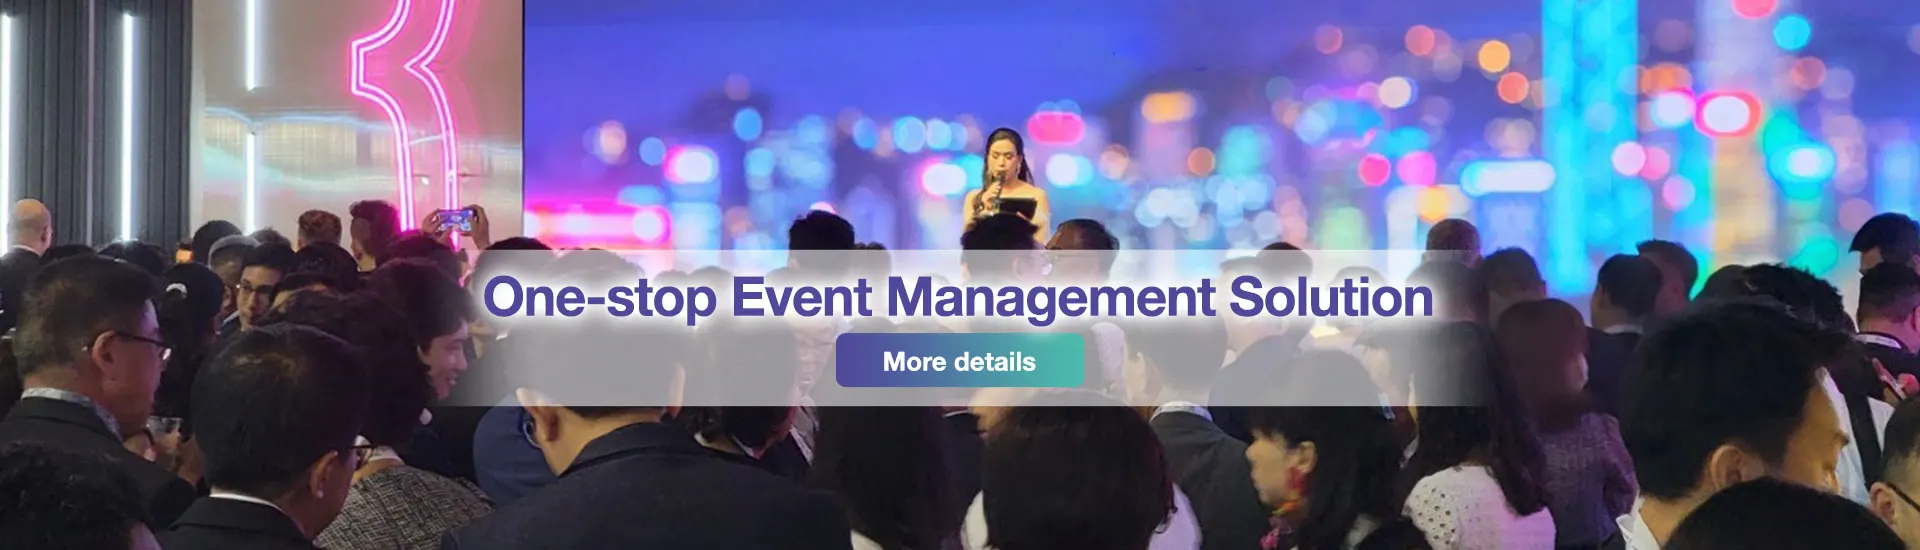 One-stop Event Management Solution